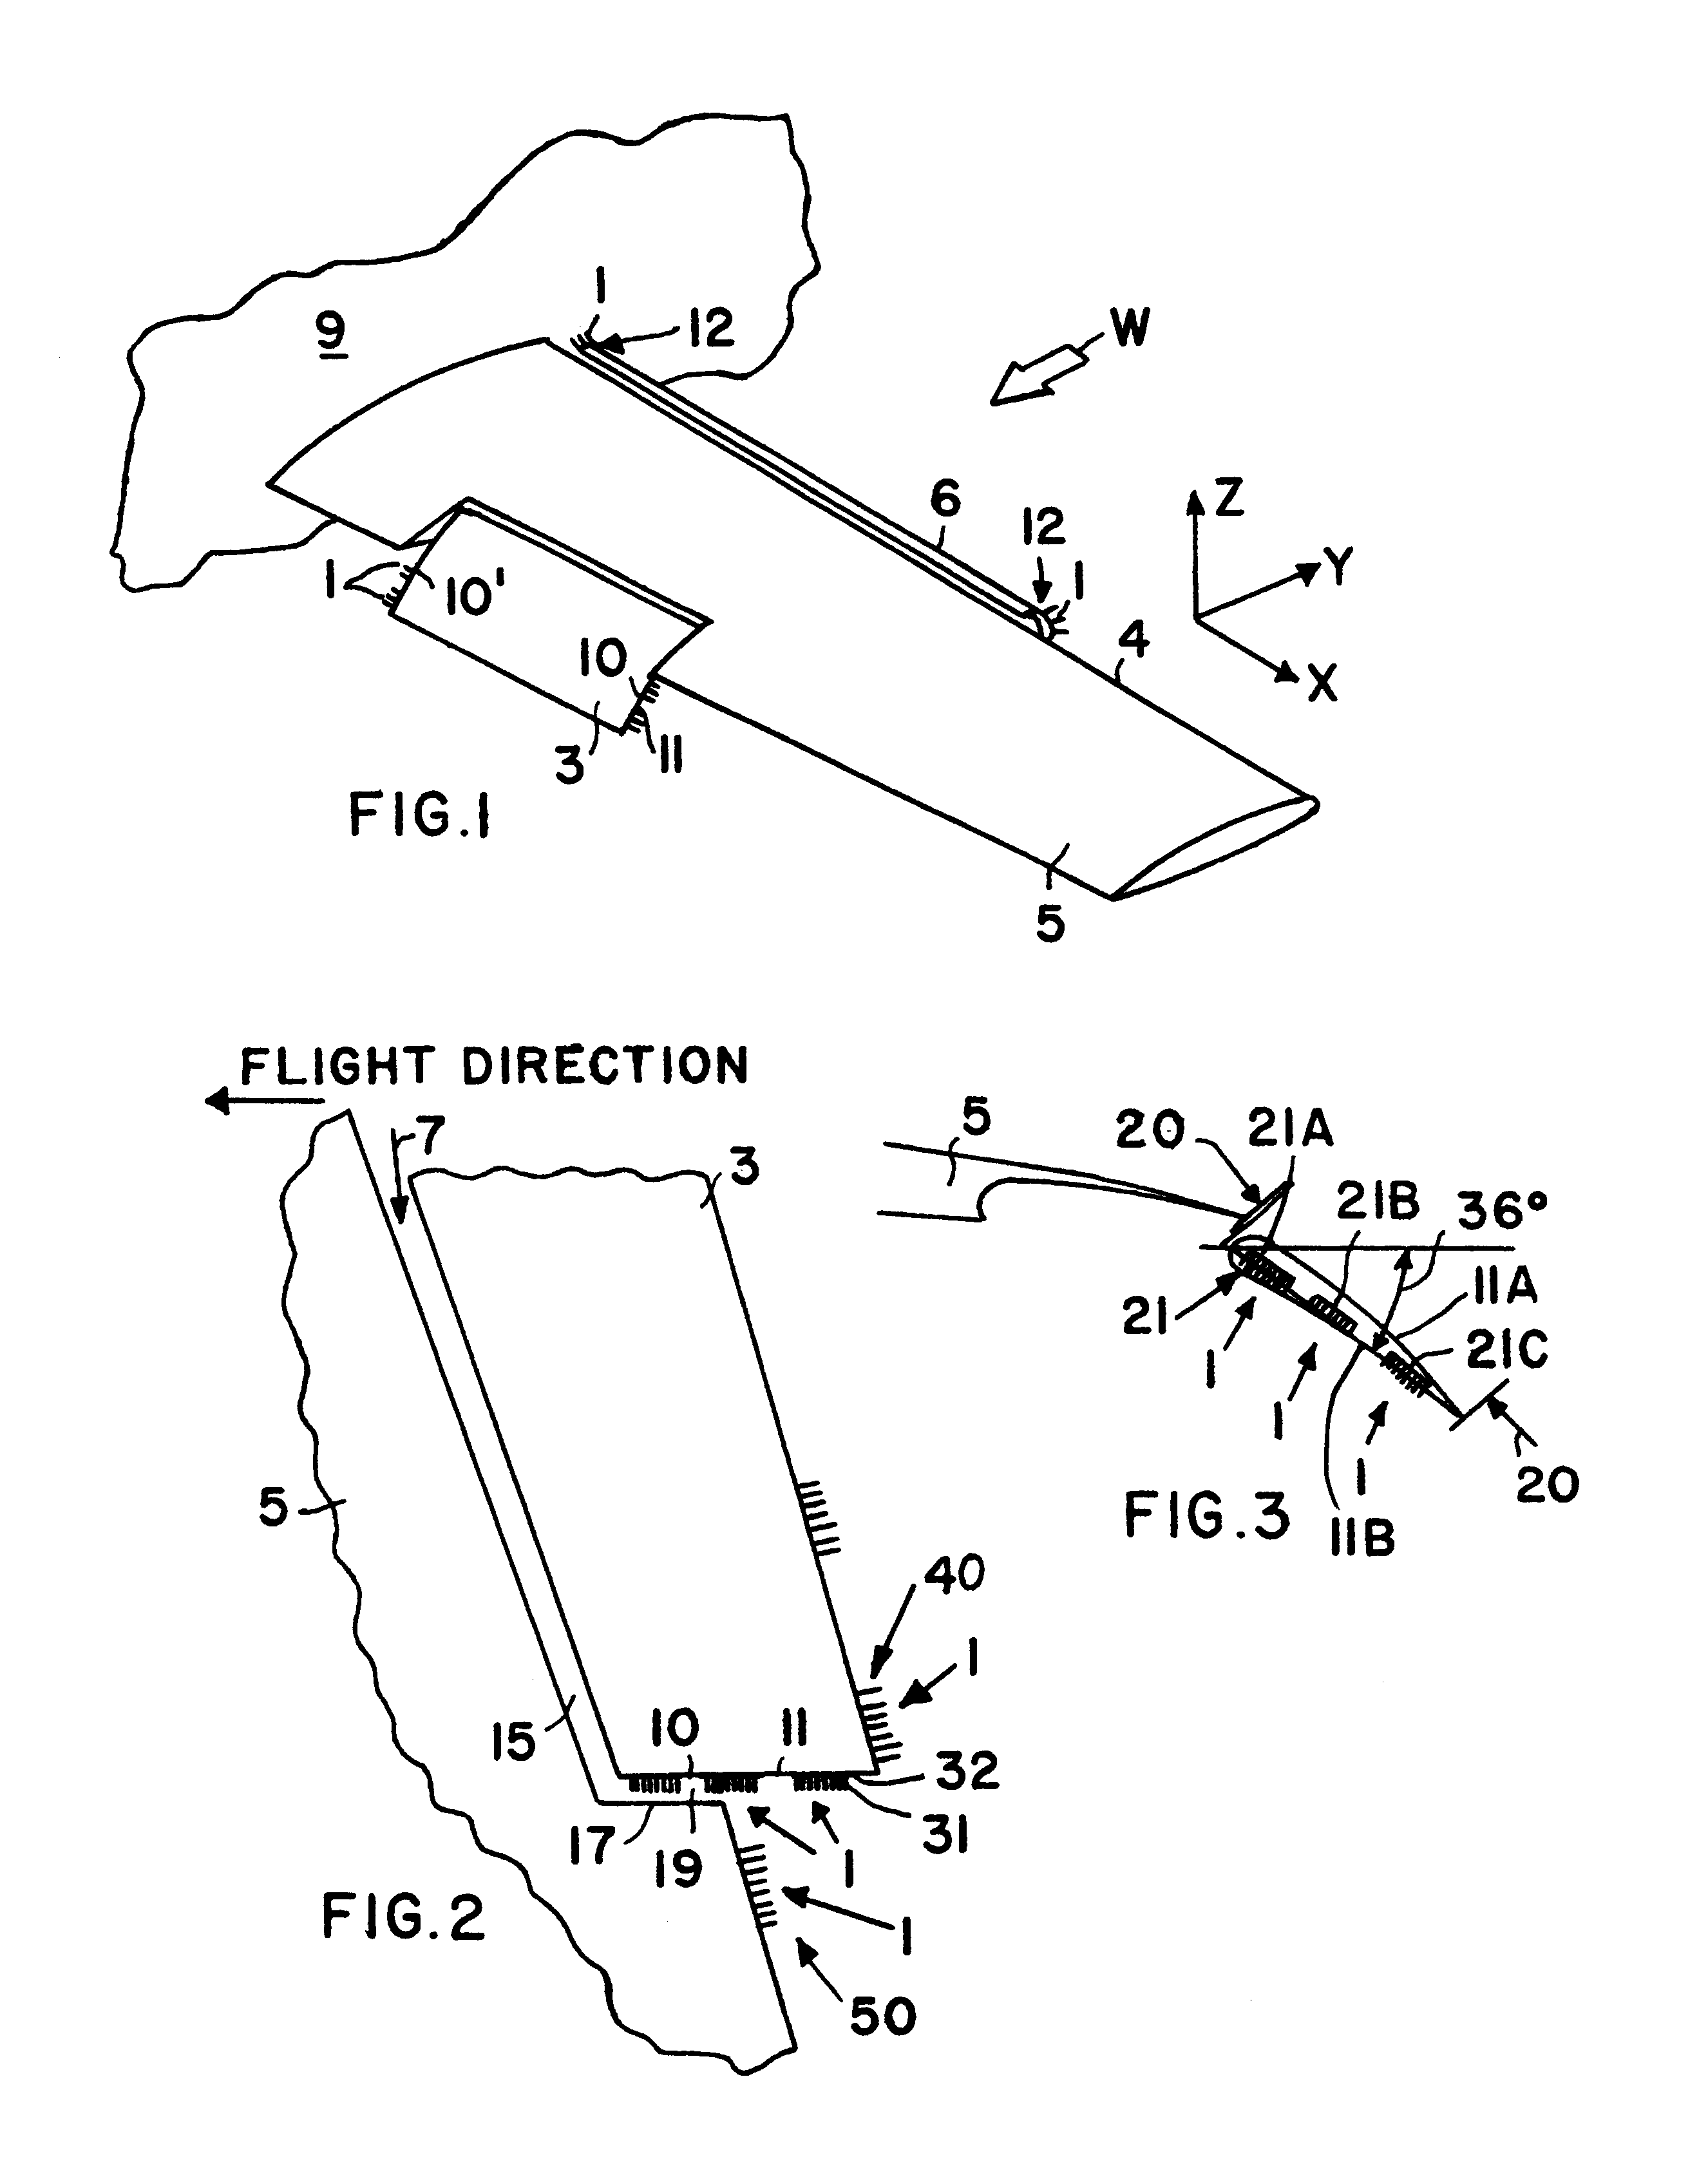 Noise reducing vortex generators on aircraft wing control surfaces